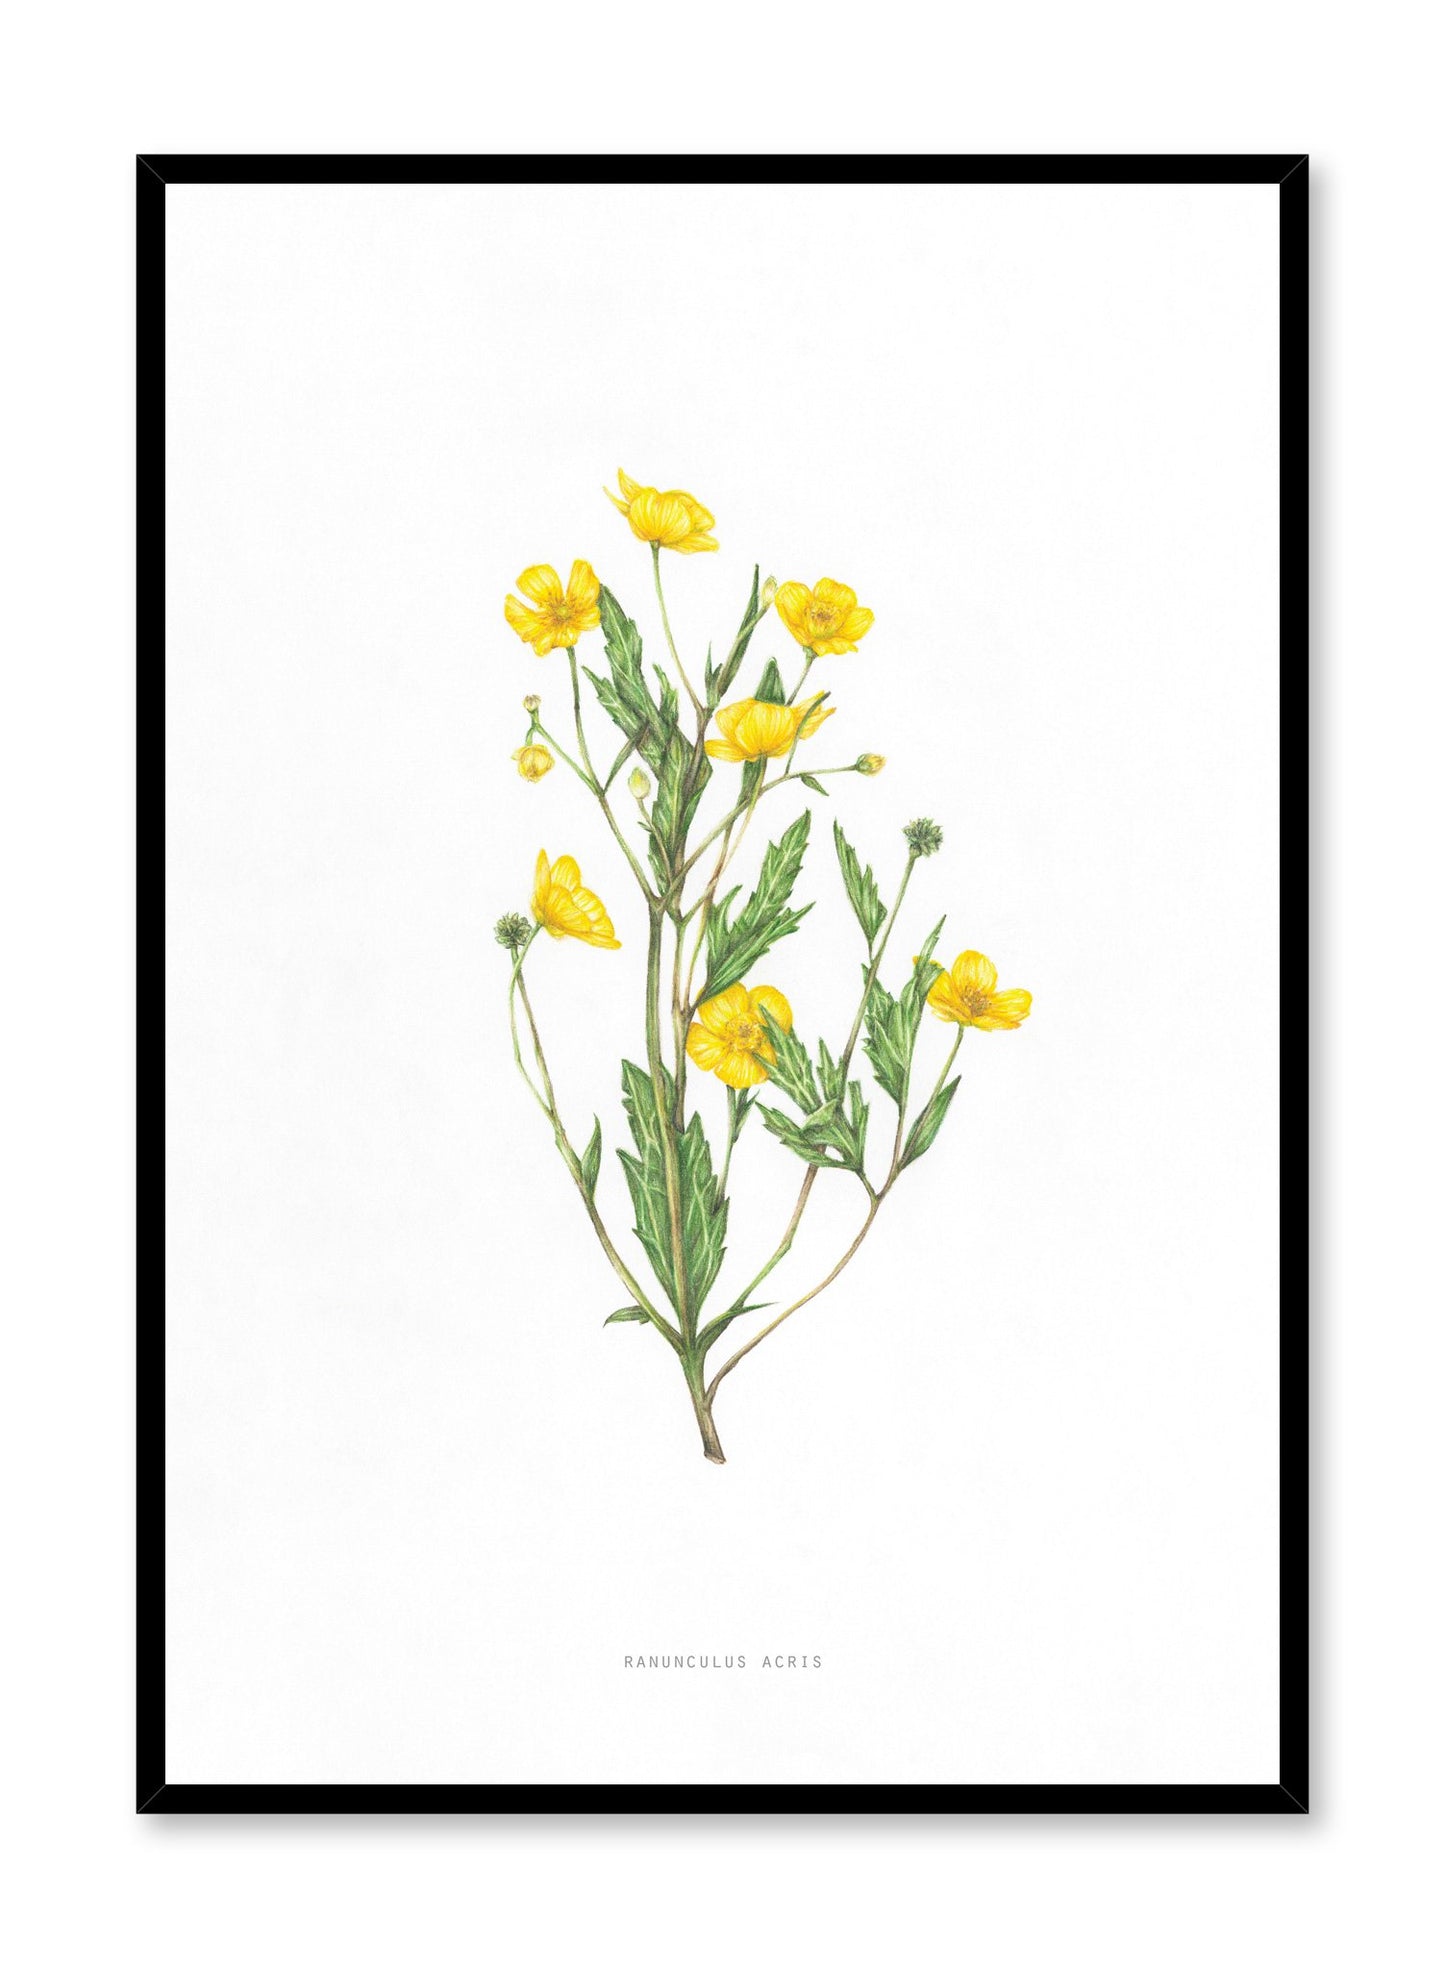 Modern minimalist poster by Opposite Wall with encyclopedic illustration of Ranunculus Acris